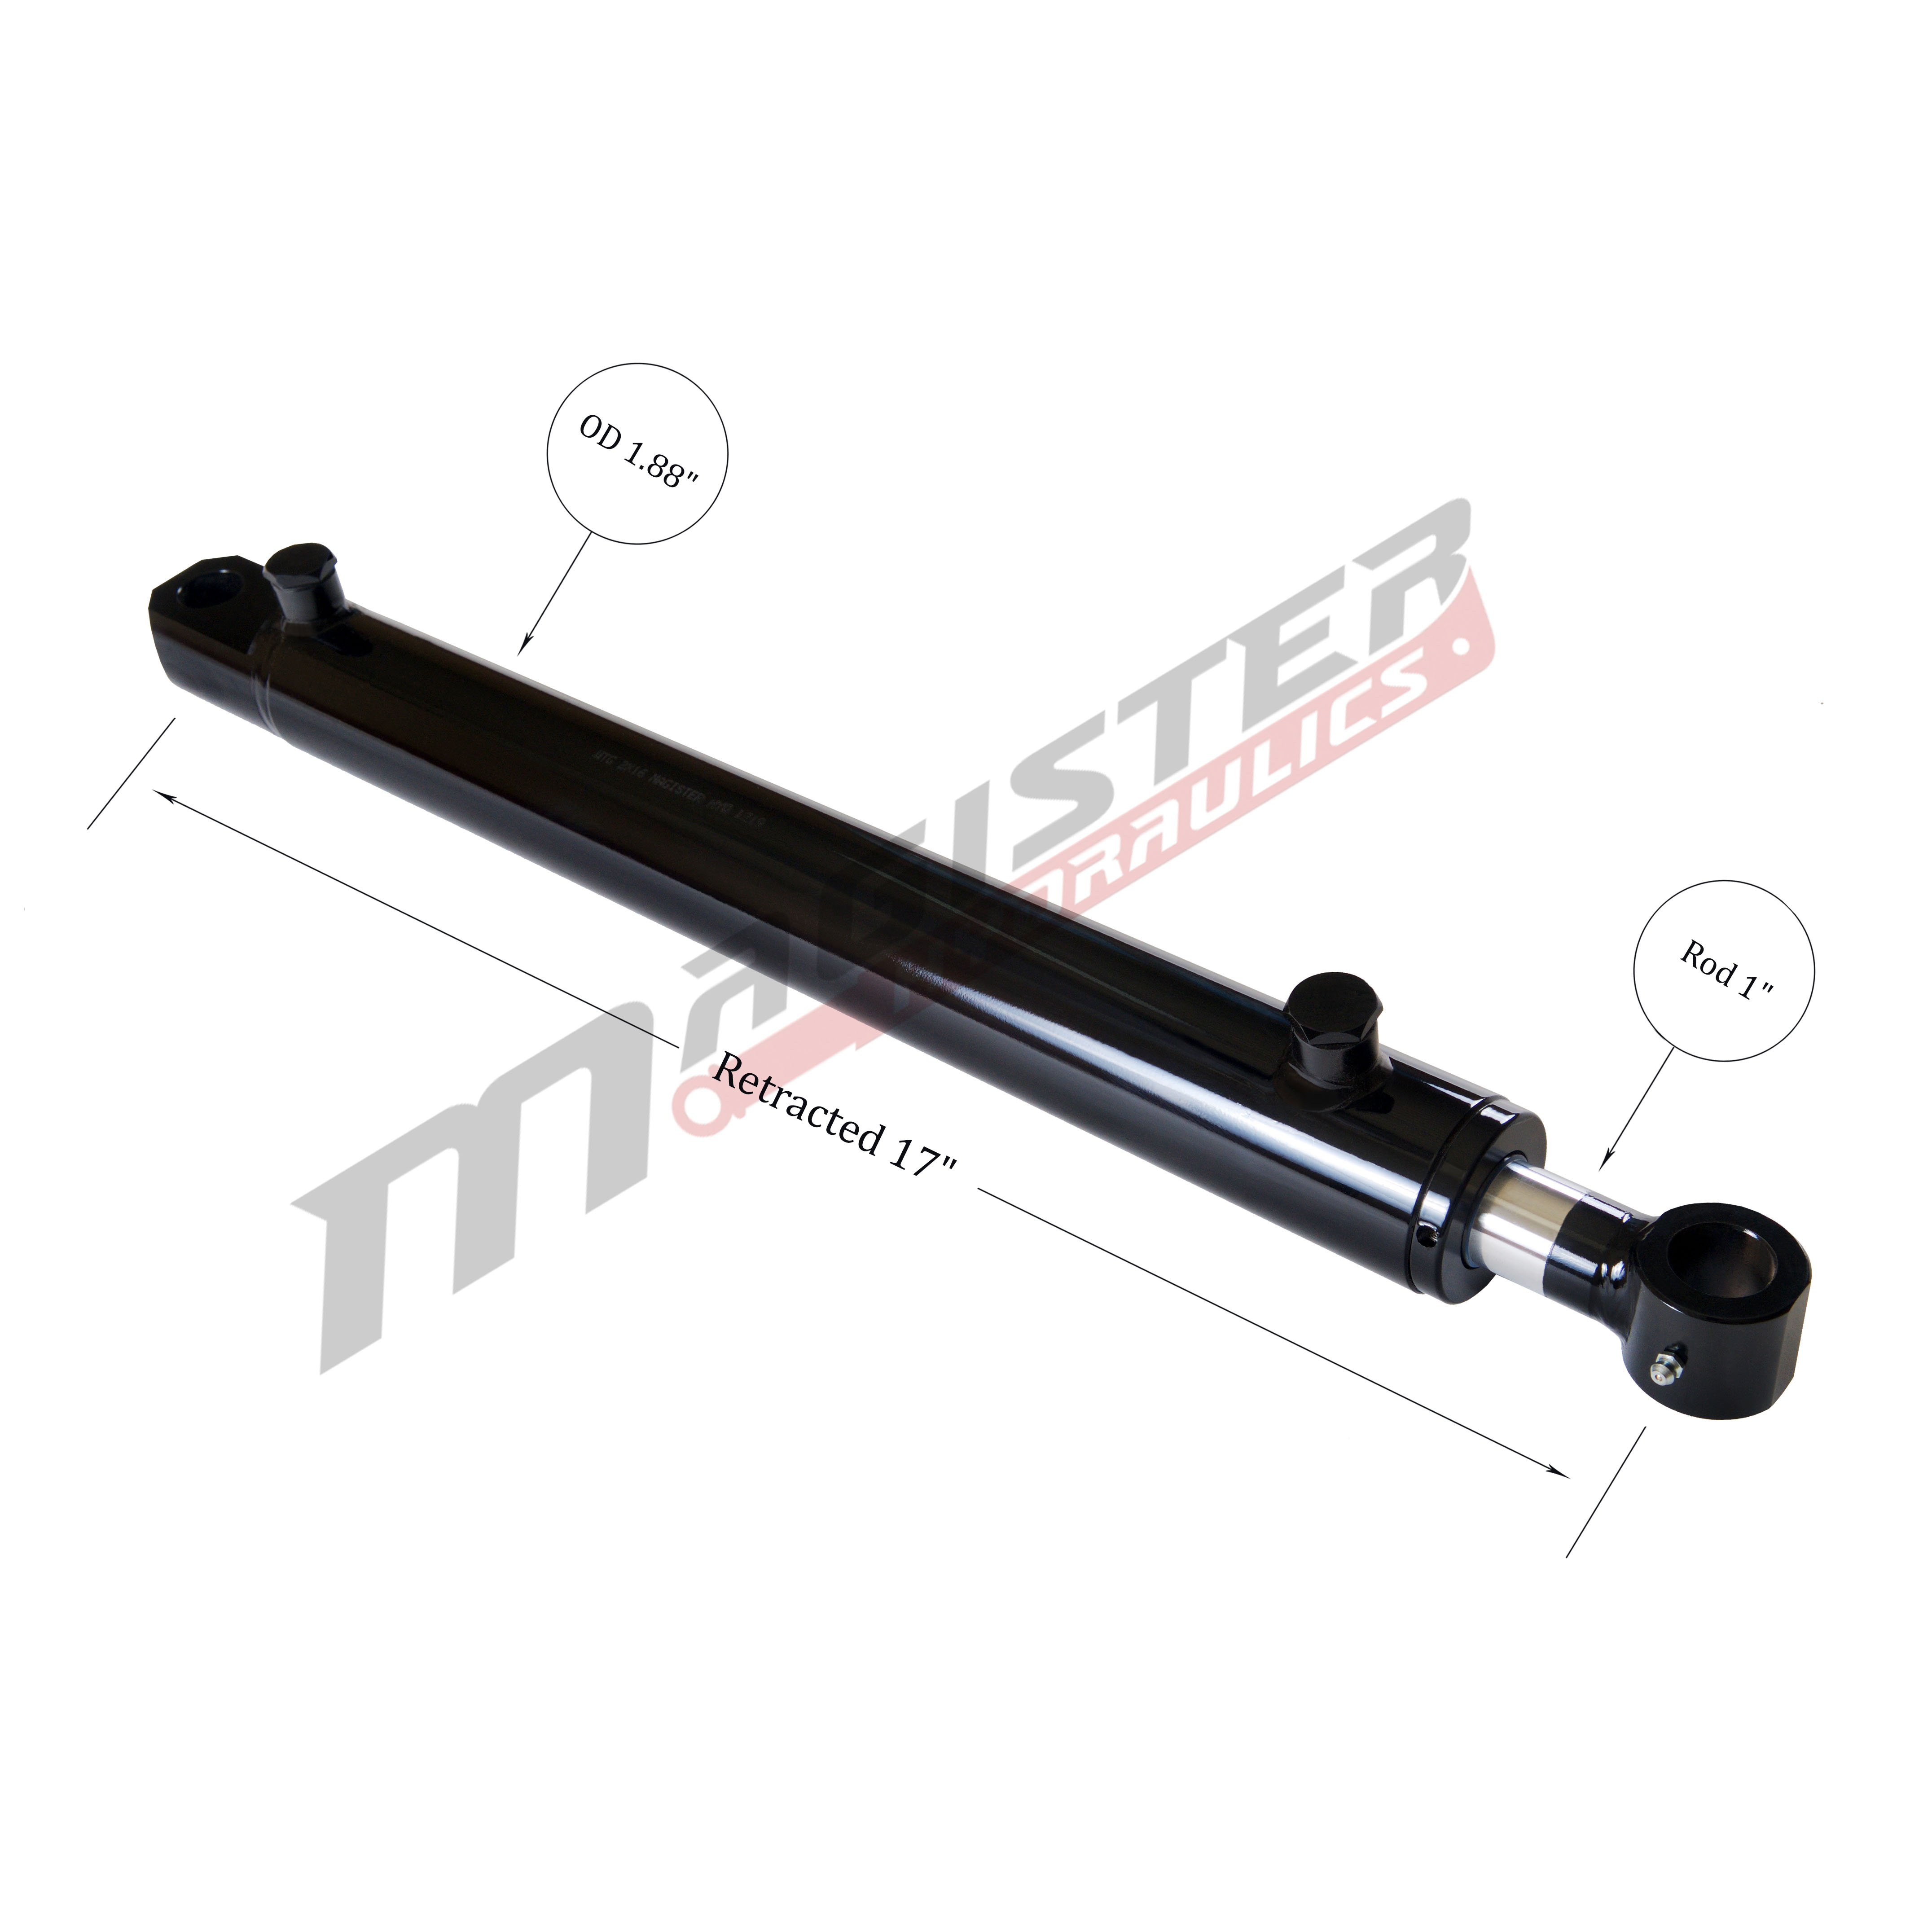 1.5 bore x 8 stroke hydraulic cylinder, welded tang double acting cylinder | Magister Hydraulics